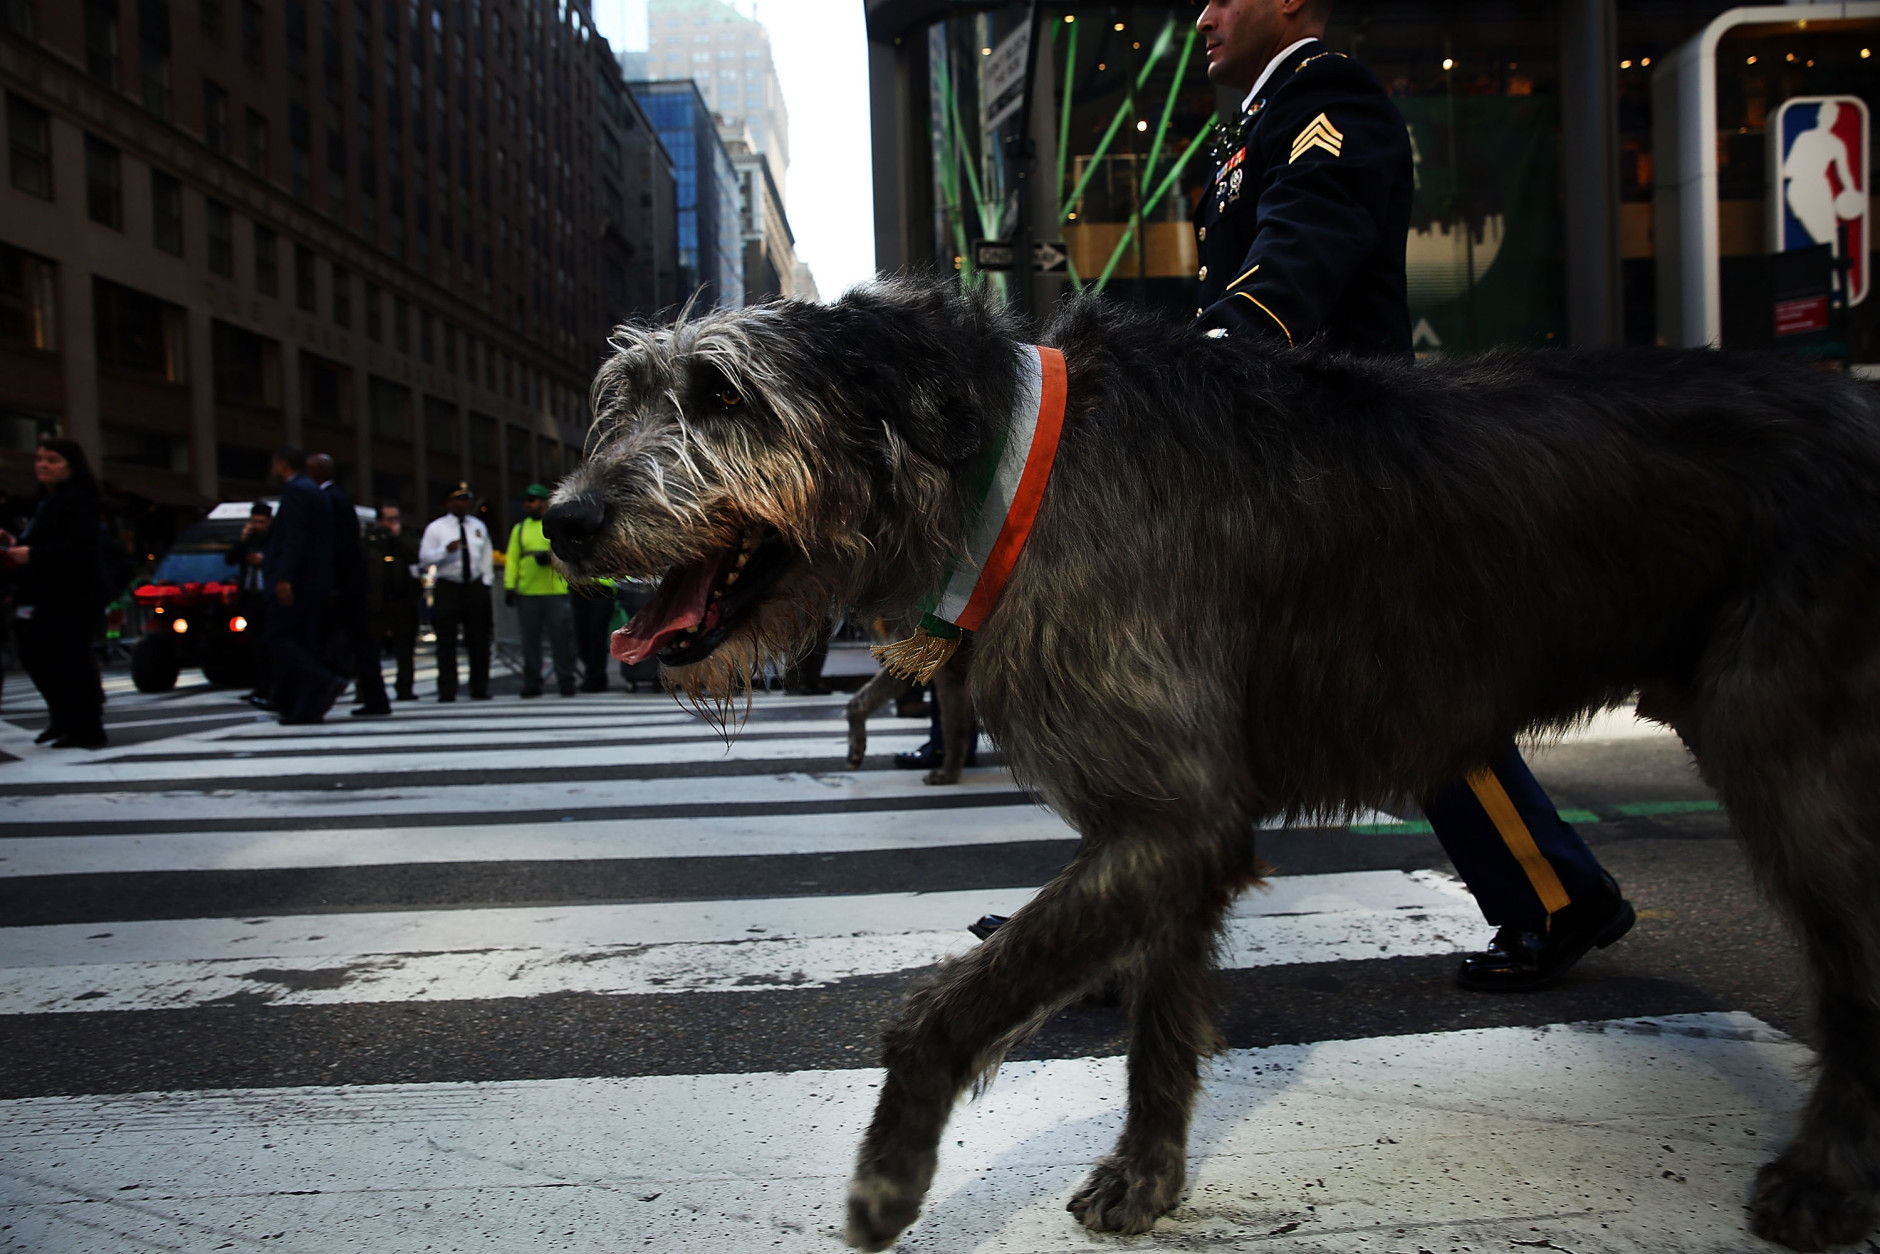 NEW YORK, NY - MARCH 17:  An Irish Wolfhound walks in the St. Patrick's Day parade, one of the largest and oldest in the world on March 17, 2016 in New York City. Now that a ban on openly gay groups has been dropped, New York Mayor Bill de Blasio is attending the parade for the first time since he became mayor in 2014. The parade goes up Fifth Avenue ending at East 79th Street and will draw an estimated 2 million spectators along its 35-block stretch.  (Photo by Spencer Platt/Getty Images)